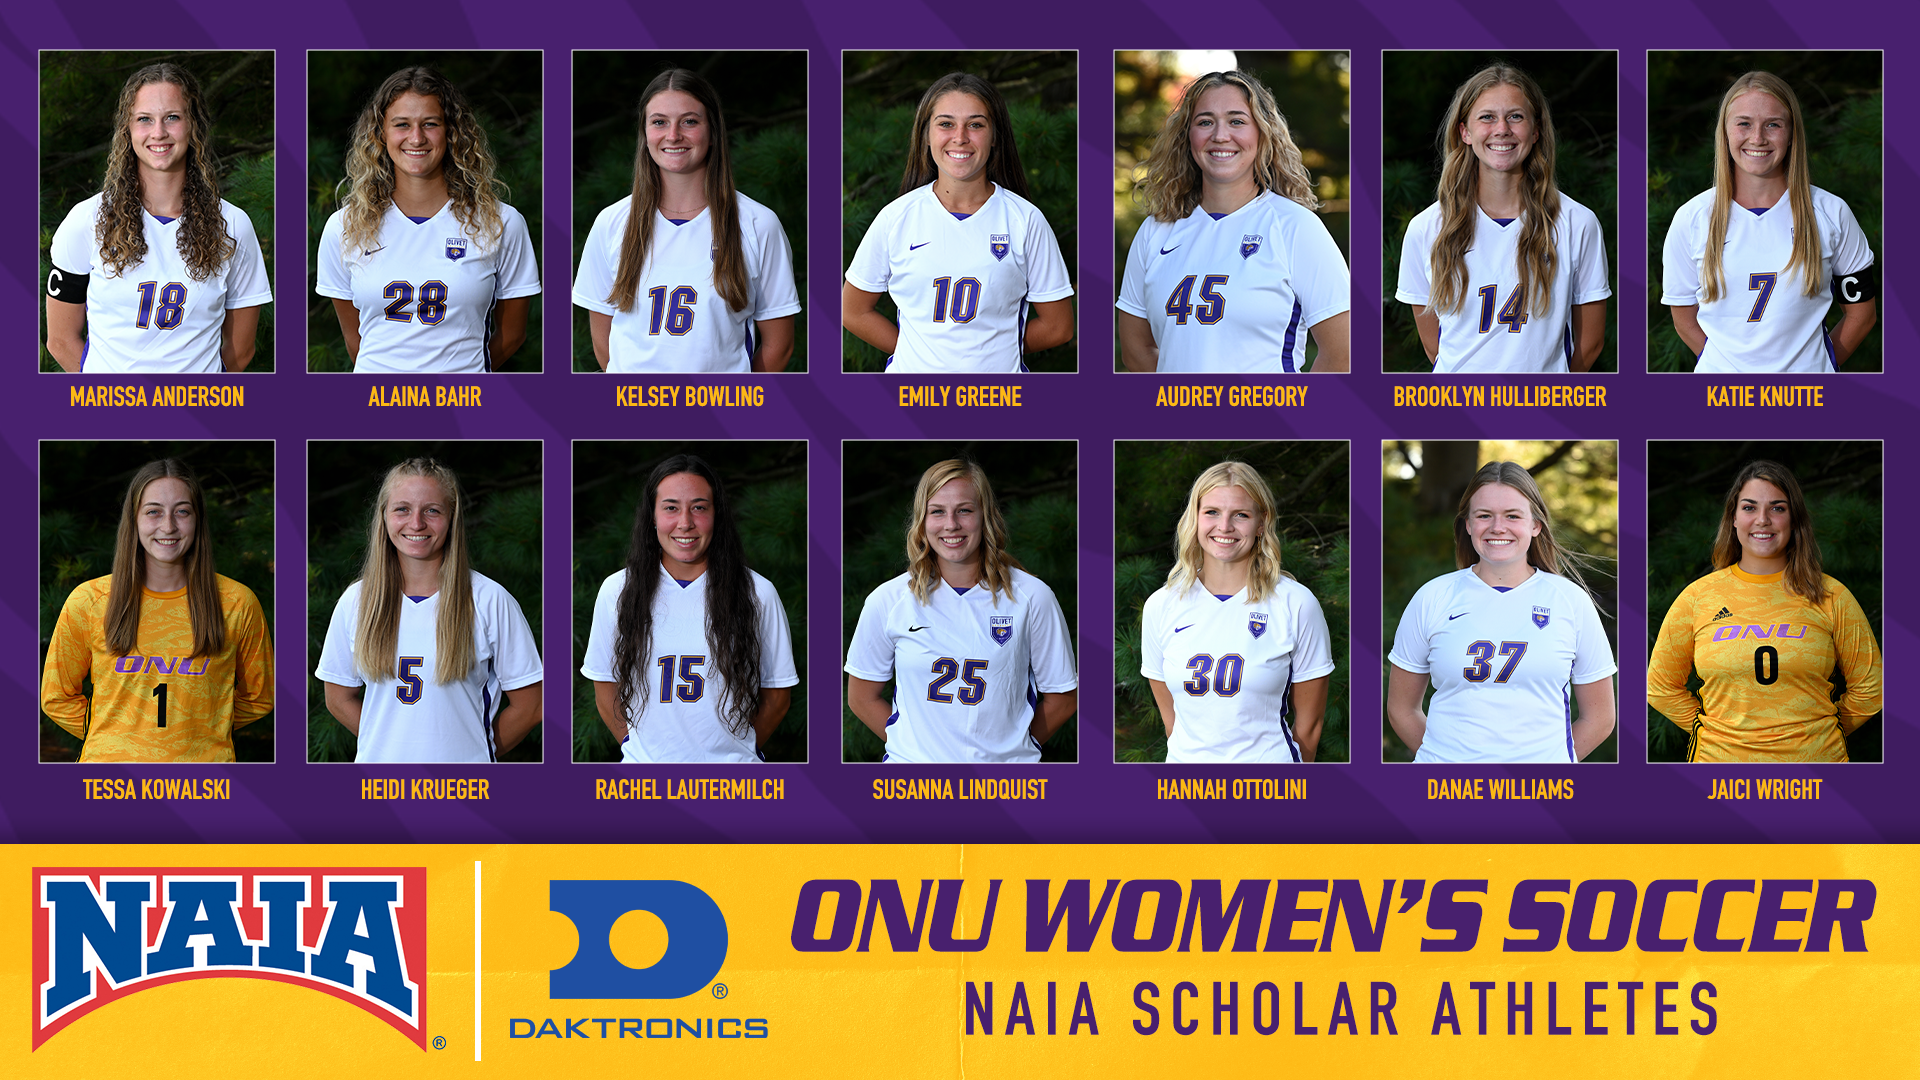 ONU WOMEN'S SOCCER LANDS 14 NAMES ON NAIA SCHOLAR-ATHLETE HONOR ROLL